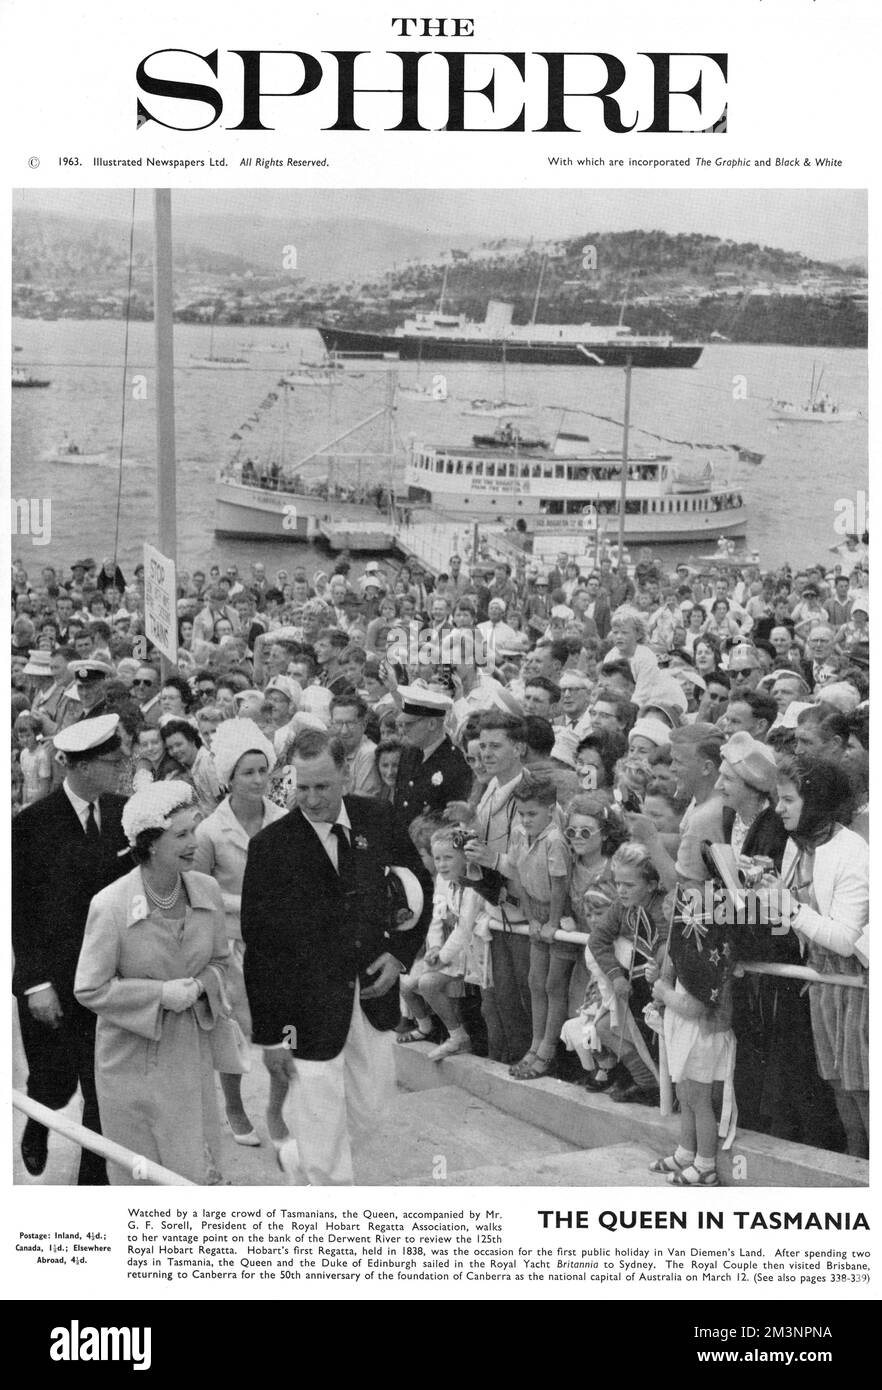 Watched by a large crowd of Tasmanians, the Queen, accompanied by G. F. Sorrell, President of the Royal Hobart Regatta Association, walks to her vantage point on the bank of the Derwent River to review the 125th Regatta.  After spending two days in Tasmania, the Queen and the Duke of Edinburgh sailed in the Royal Yacht Britannia to Sydney.       Date: 1963 Stock Photo